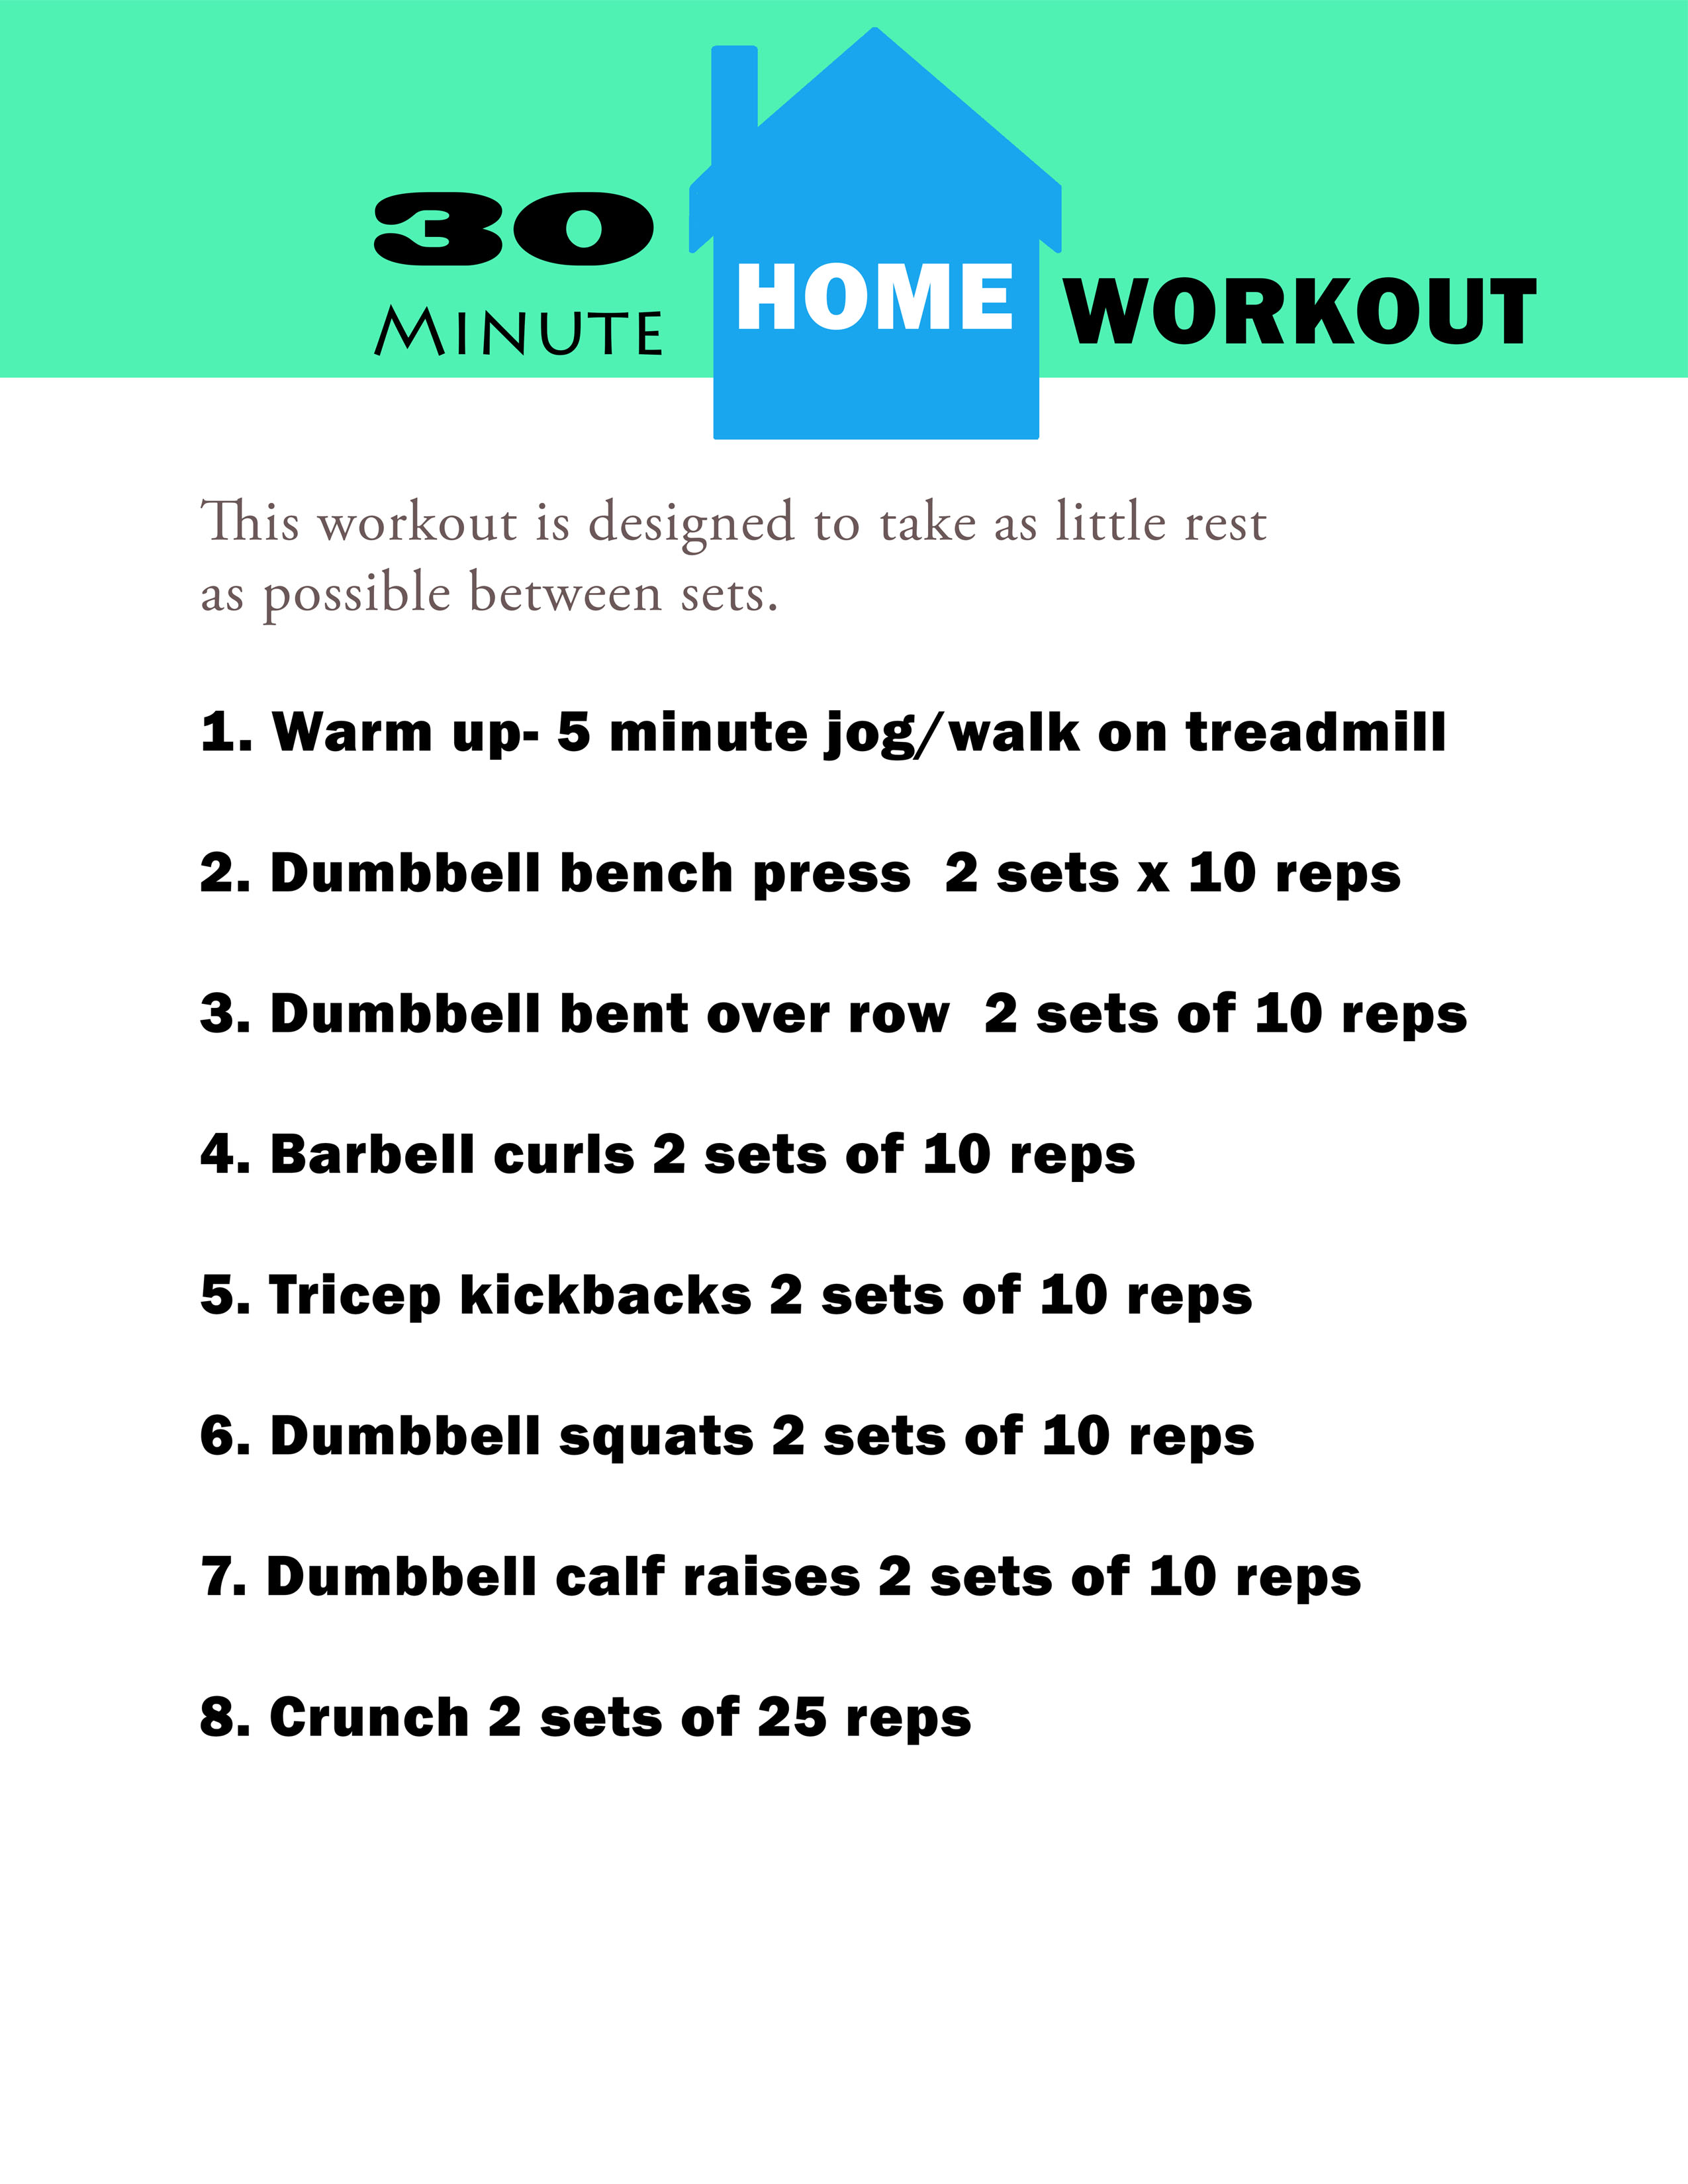 30 minute home workout you can download and print.